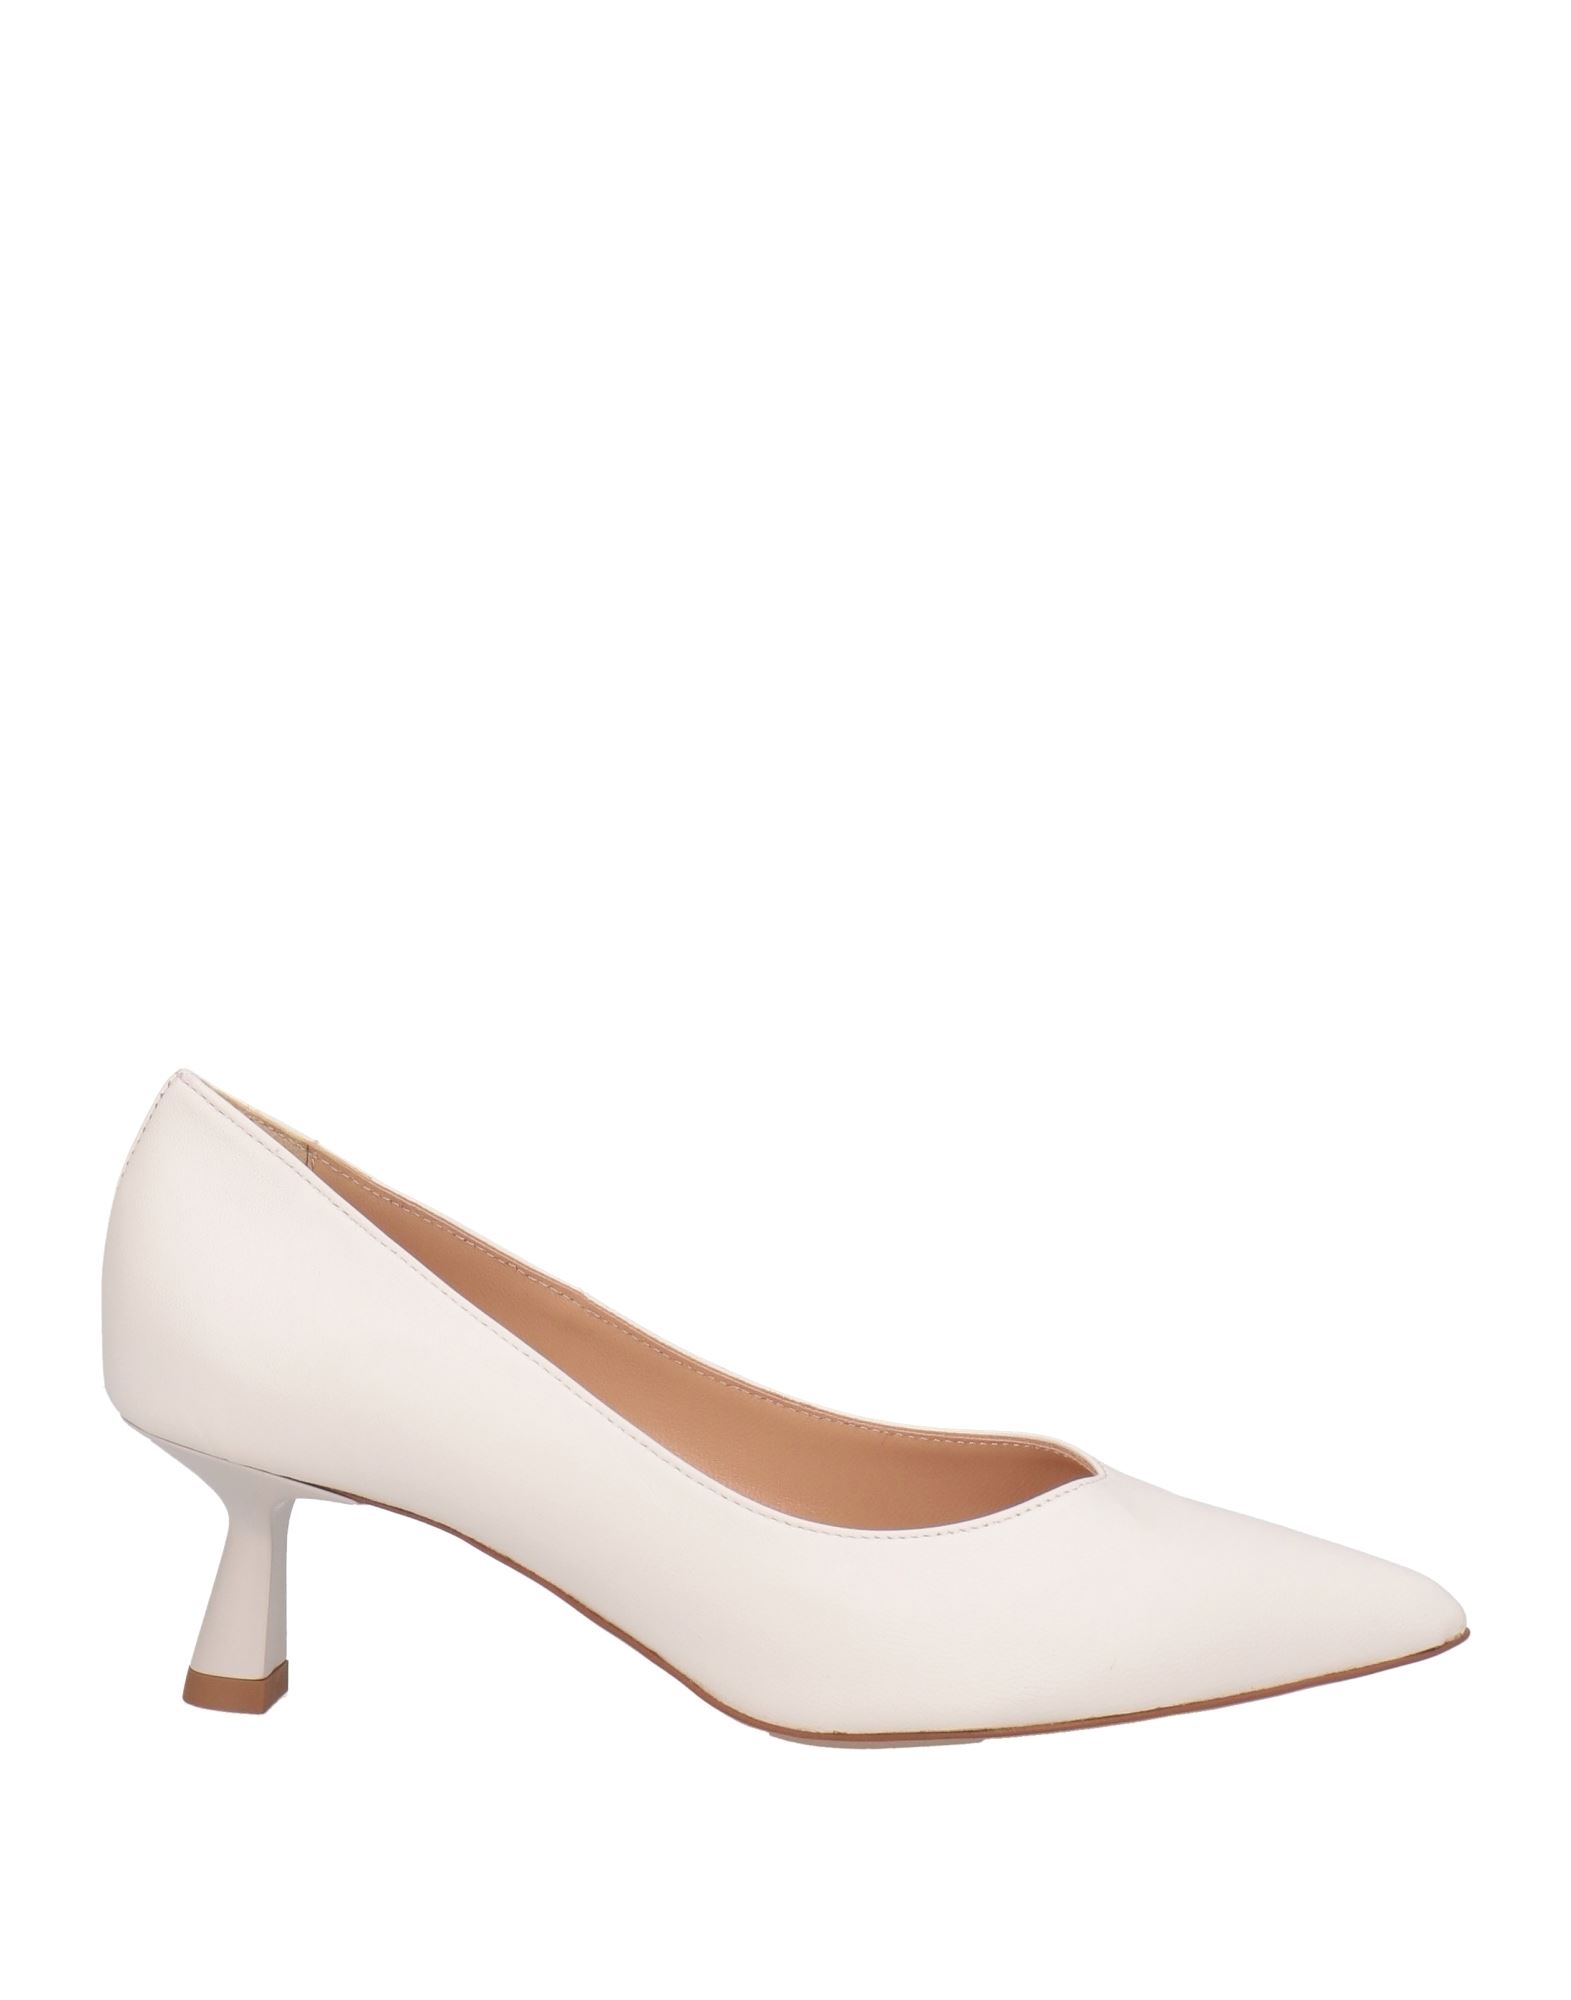 Formentini Pumps In Ivory